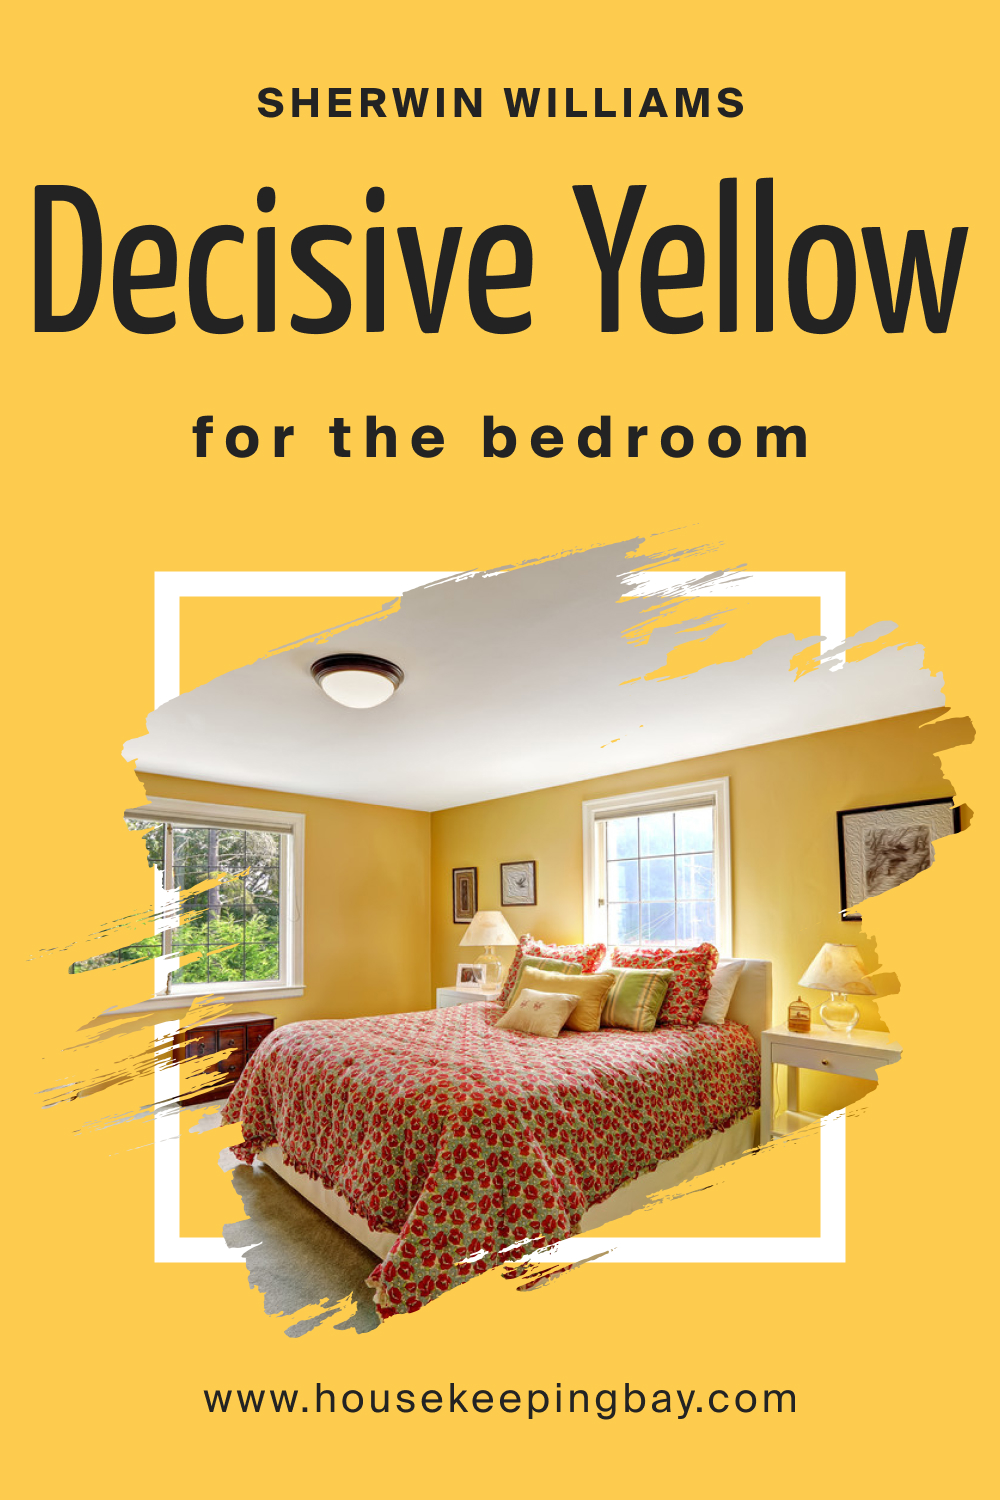 Sherwin Williams. Decisive Yellow SW 6902 For the bedroom